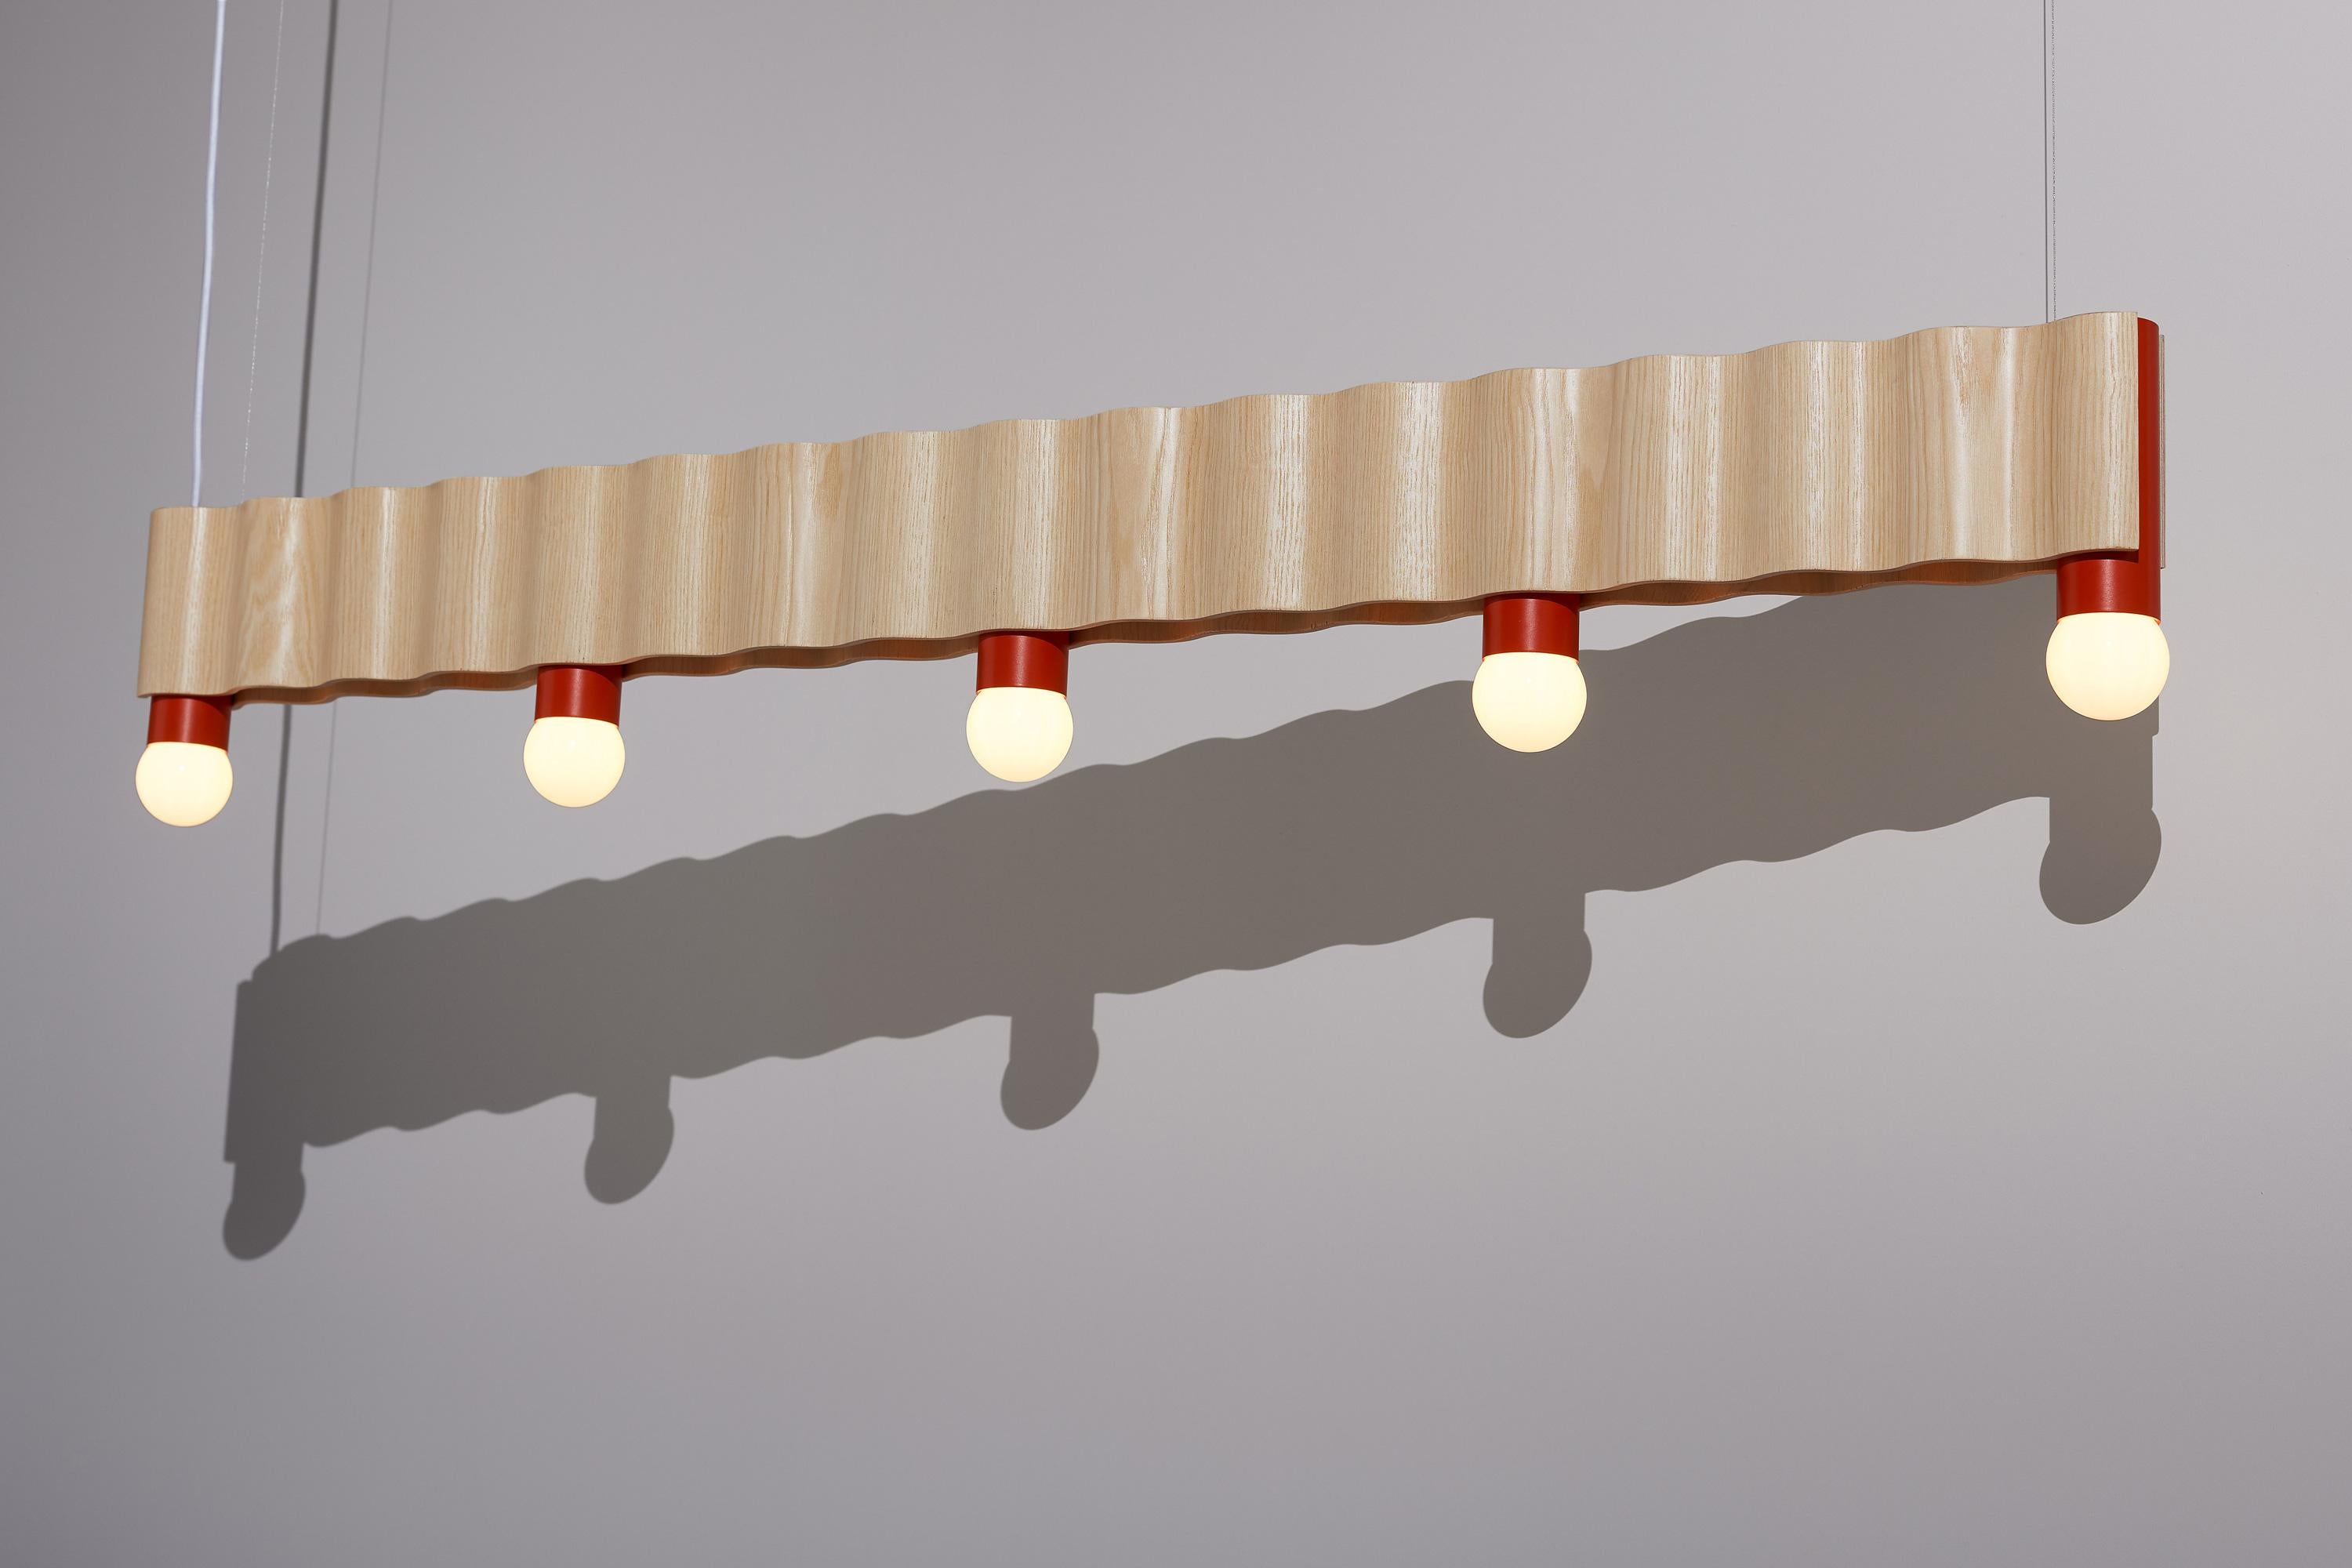 Linear corrugation pendant light (5 bulbs) made from ash veneered plywood (clear coated) and Vermilion red (RAL 2002) powder-coated aluminium tubes.

Created in collaboration with Theodora Alfredsdottir.

“Corrugation” is a collection of lights